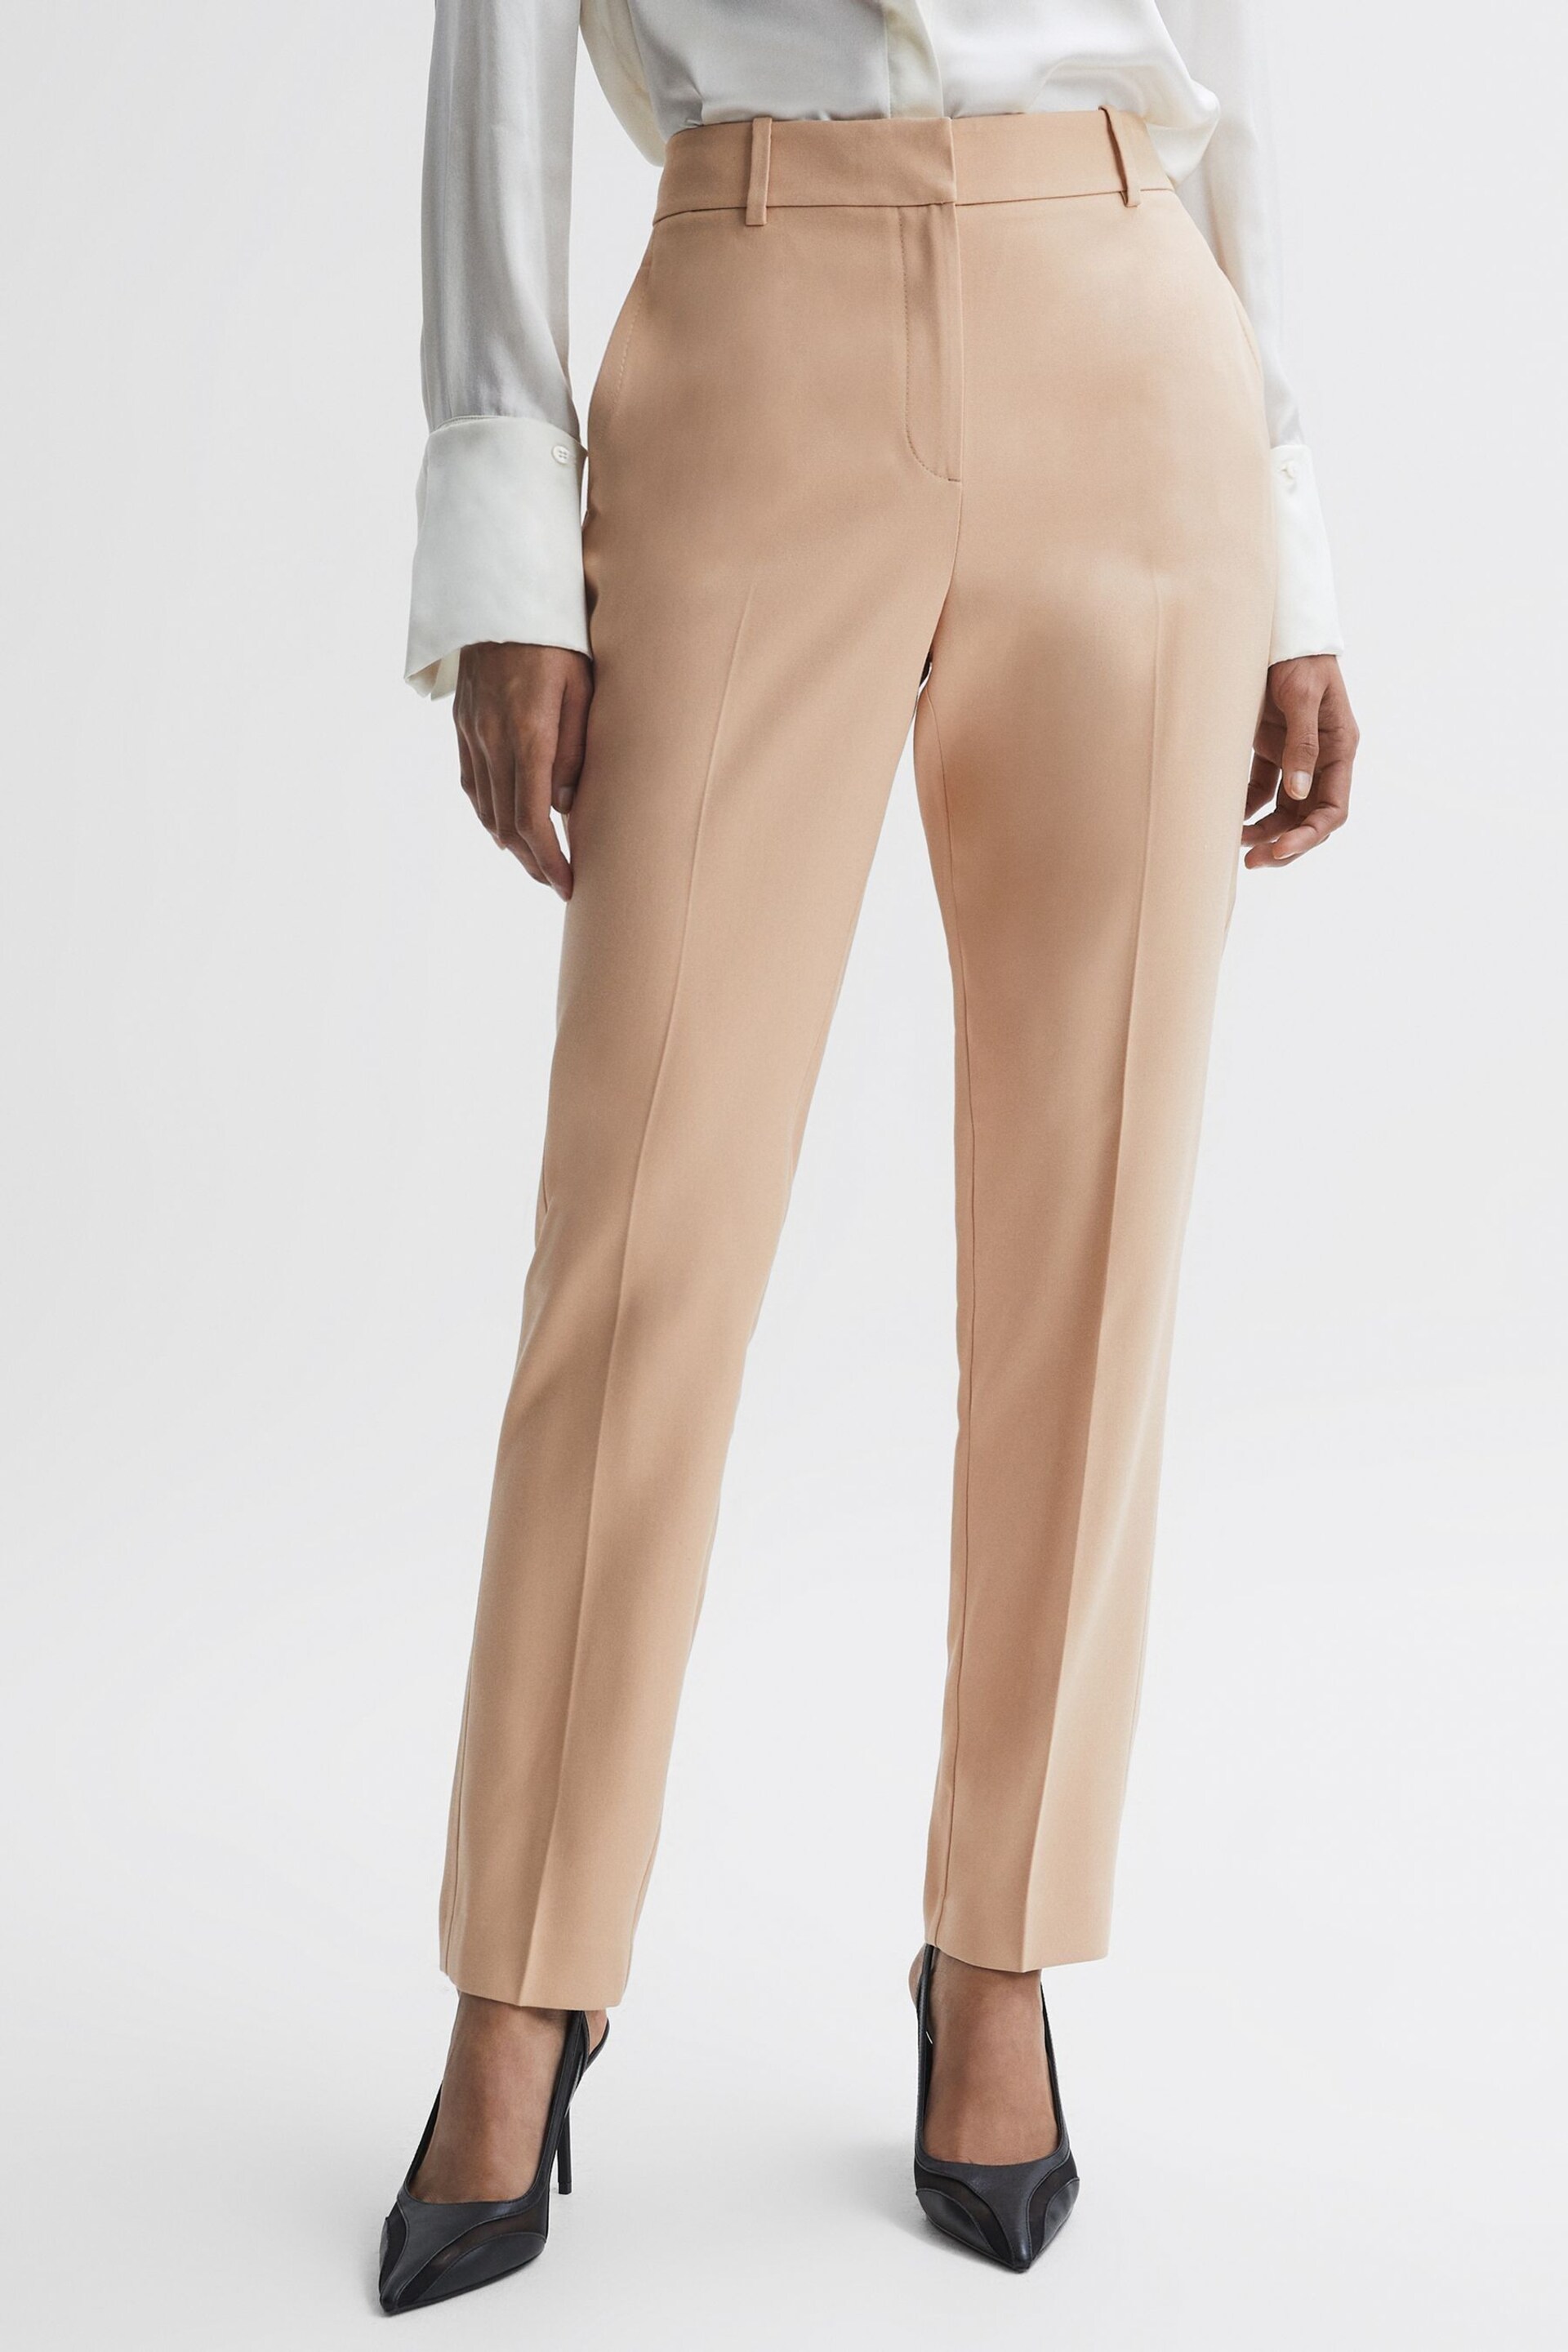 Reiss Camel Ember Slim Fit High Rise Trousers - Image 3 of 5